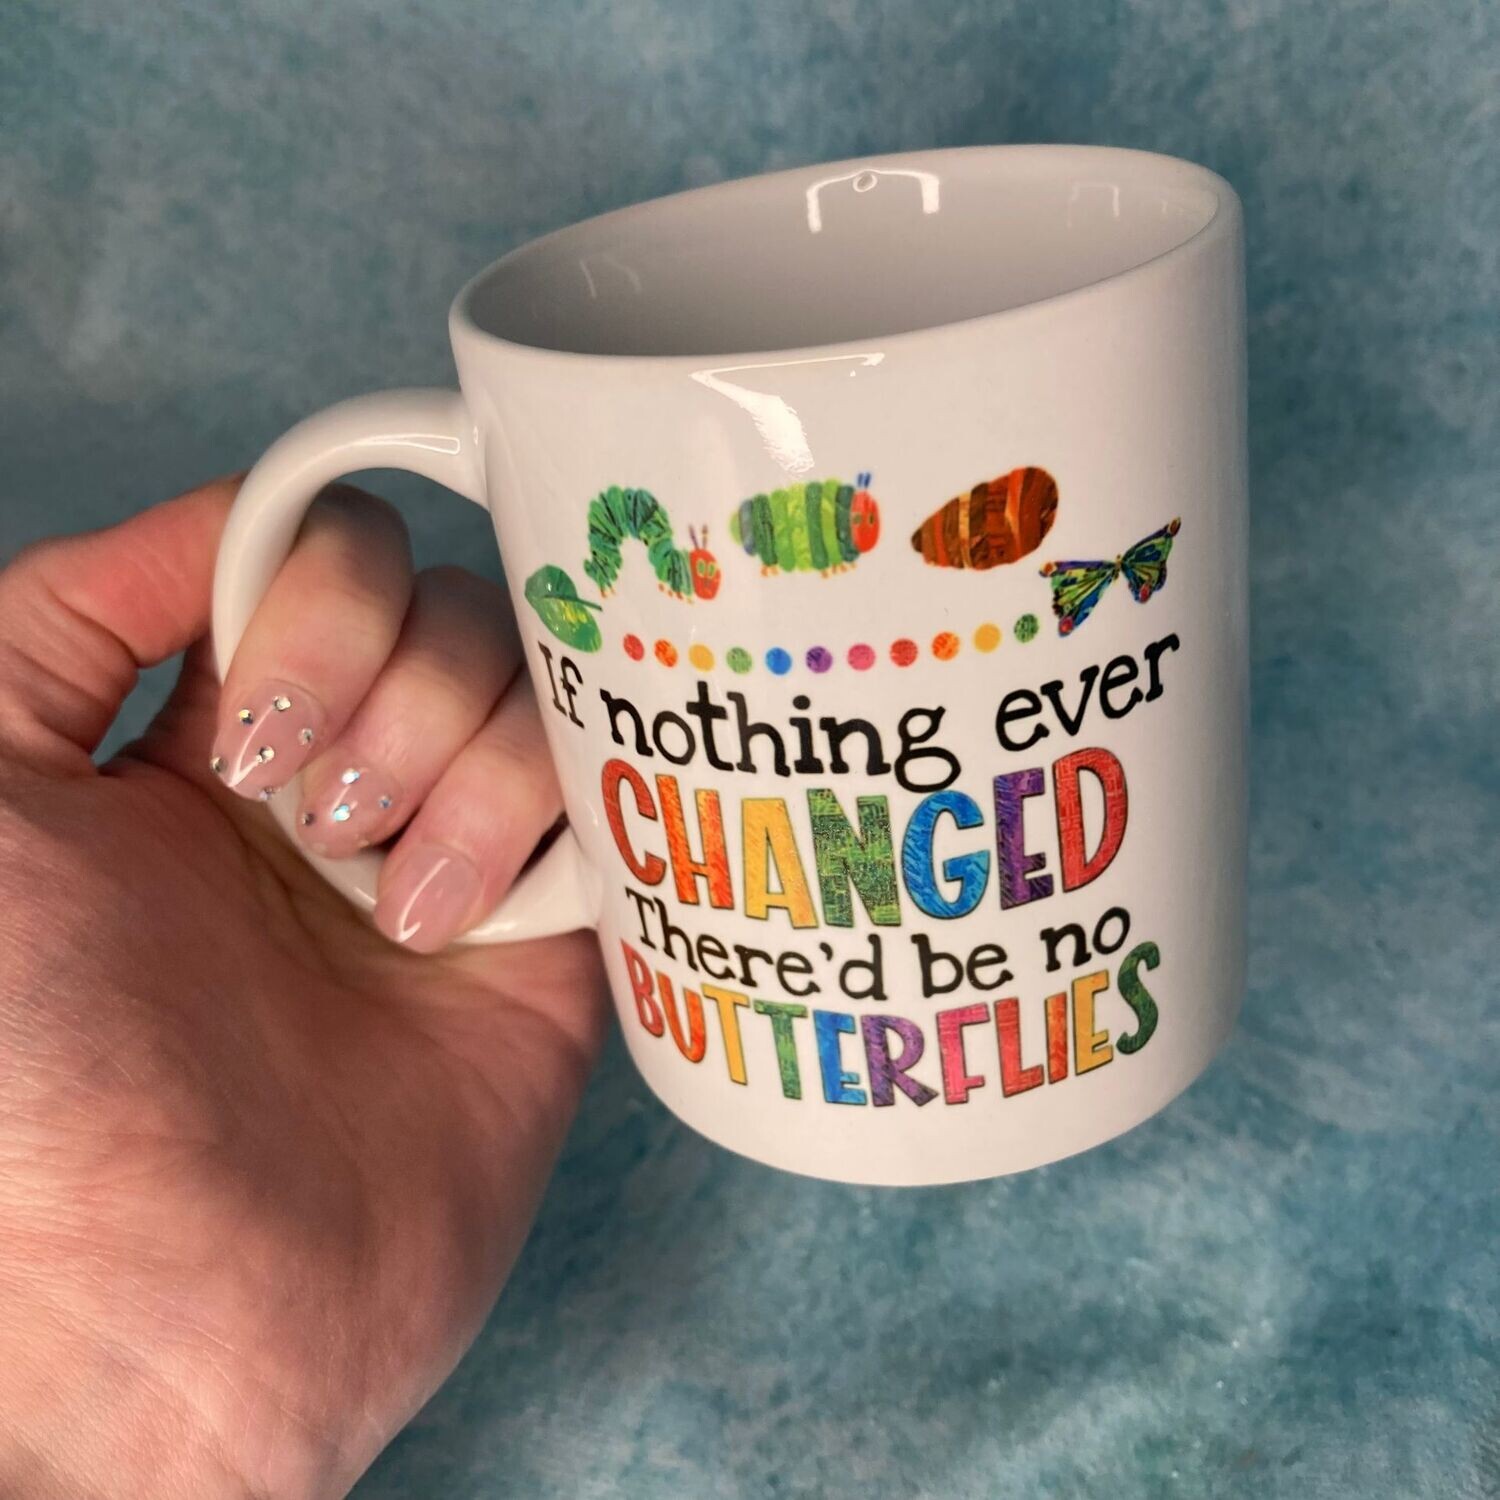 If Nothing Ever Changed There'd be no Butterflies Mug